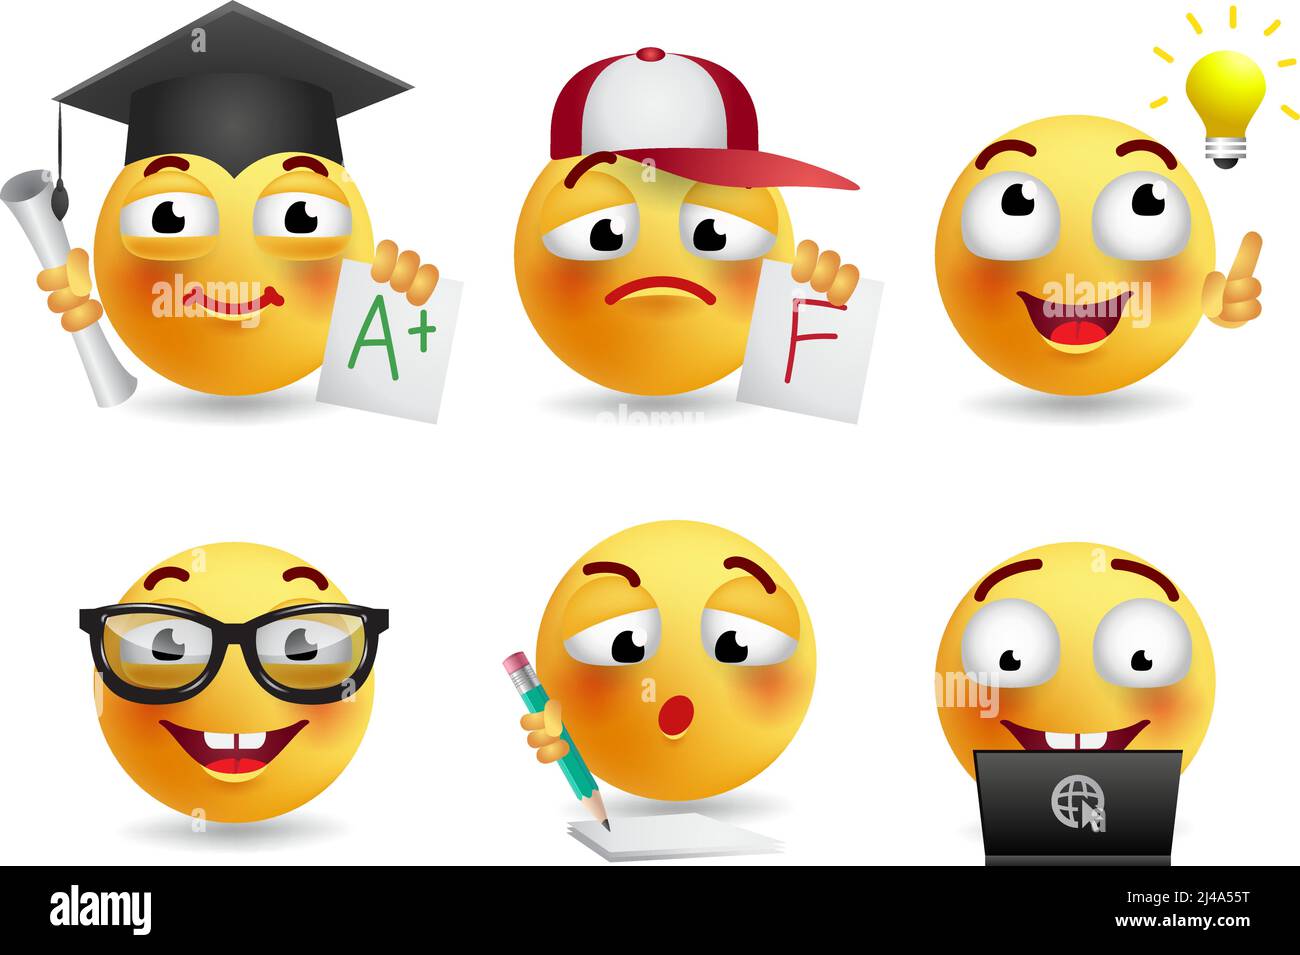 Set of smileys realistic vector illustration. Emoticon, emotion, back to school. Cute characters for app design, mobile application. Stock Vector